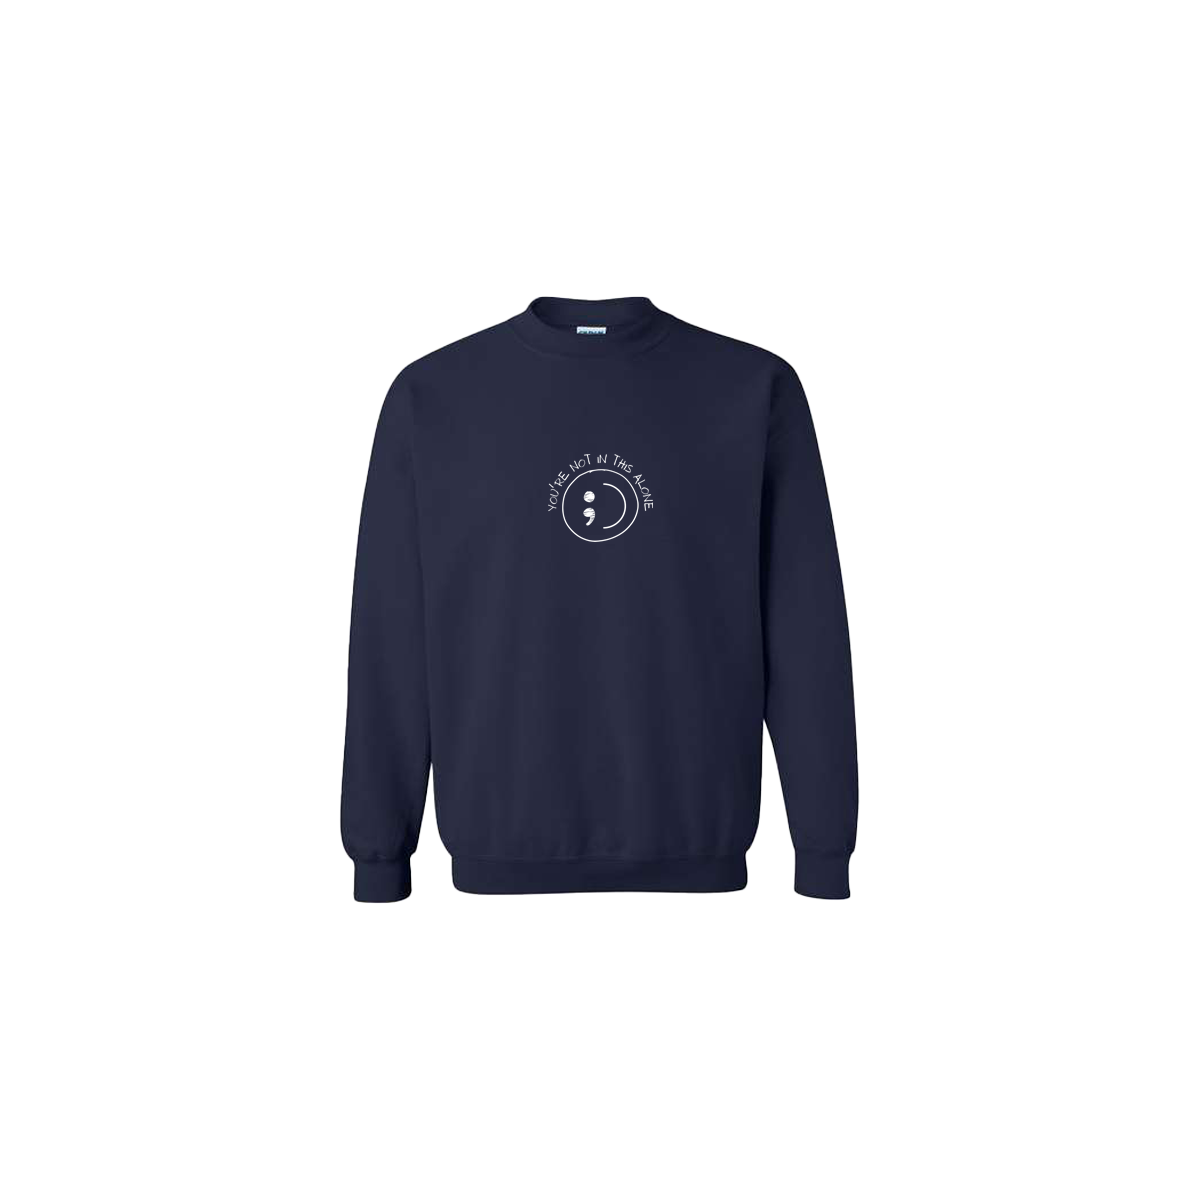 You're Not In This Alone Embroidered Navy Blue Crewneck - Mental Health Awareness Clothing